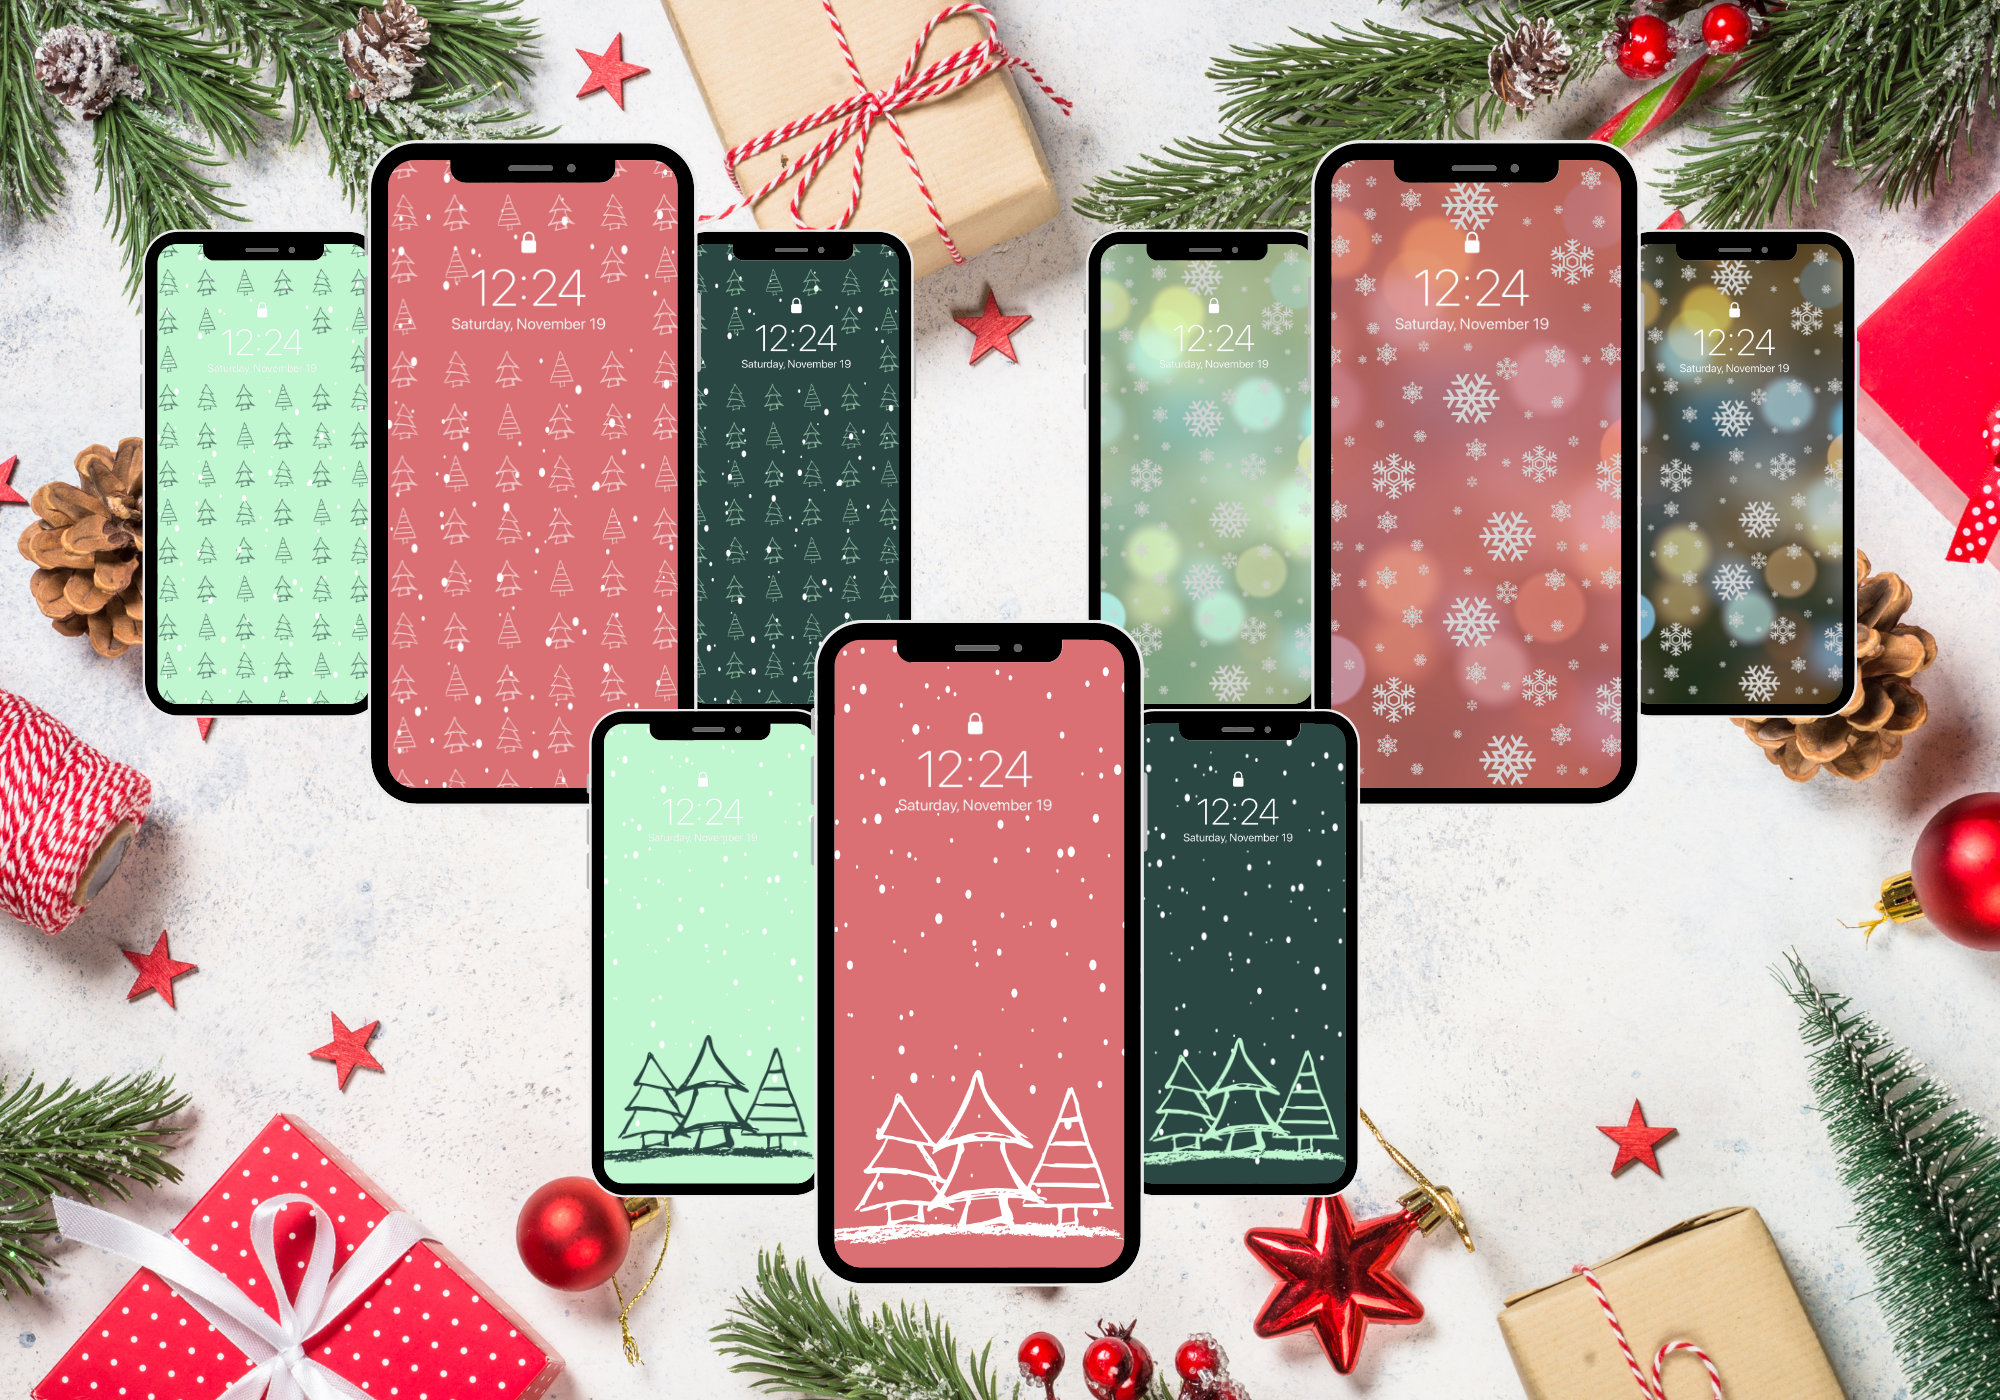 IPhone Christmas Holiday Lock Screen and Wallpaper Ios 16 - Etsy